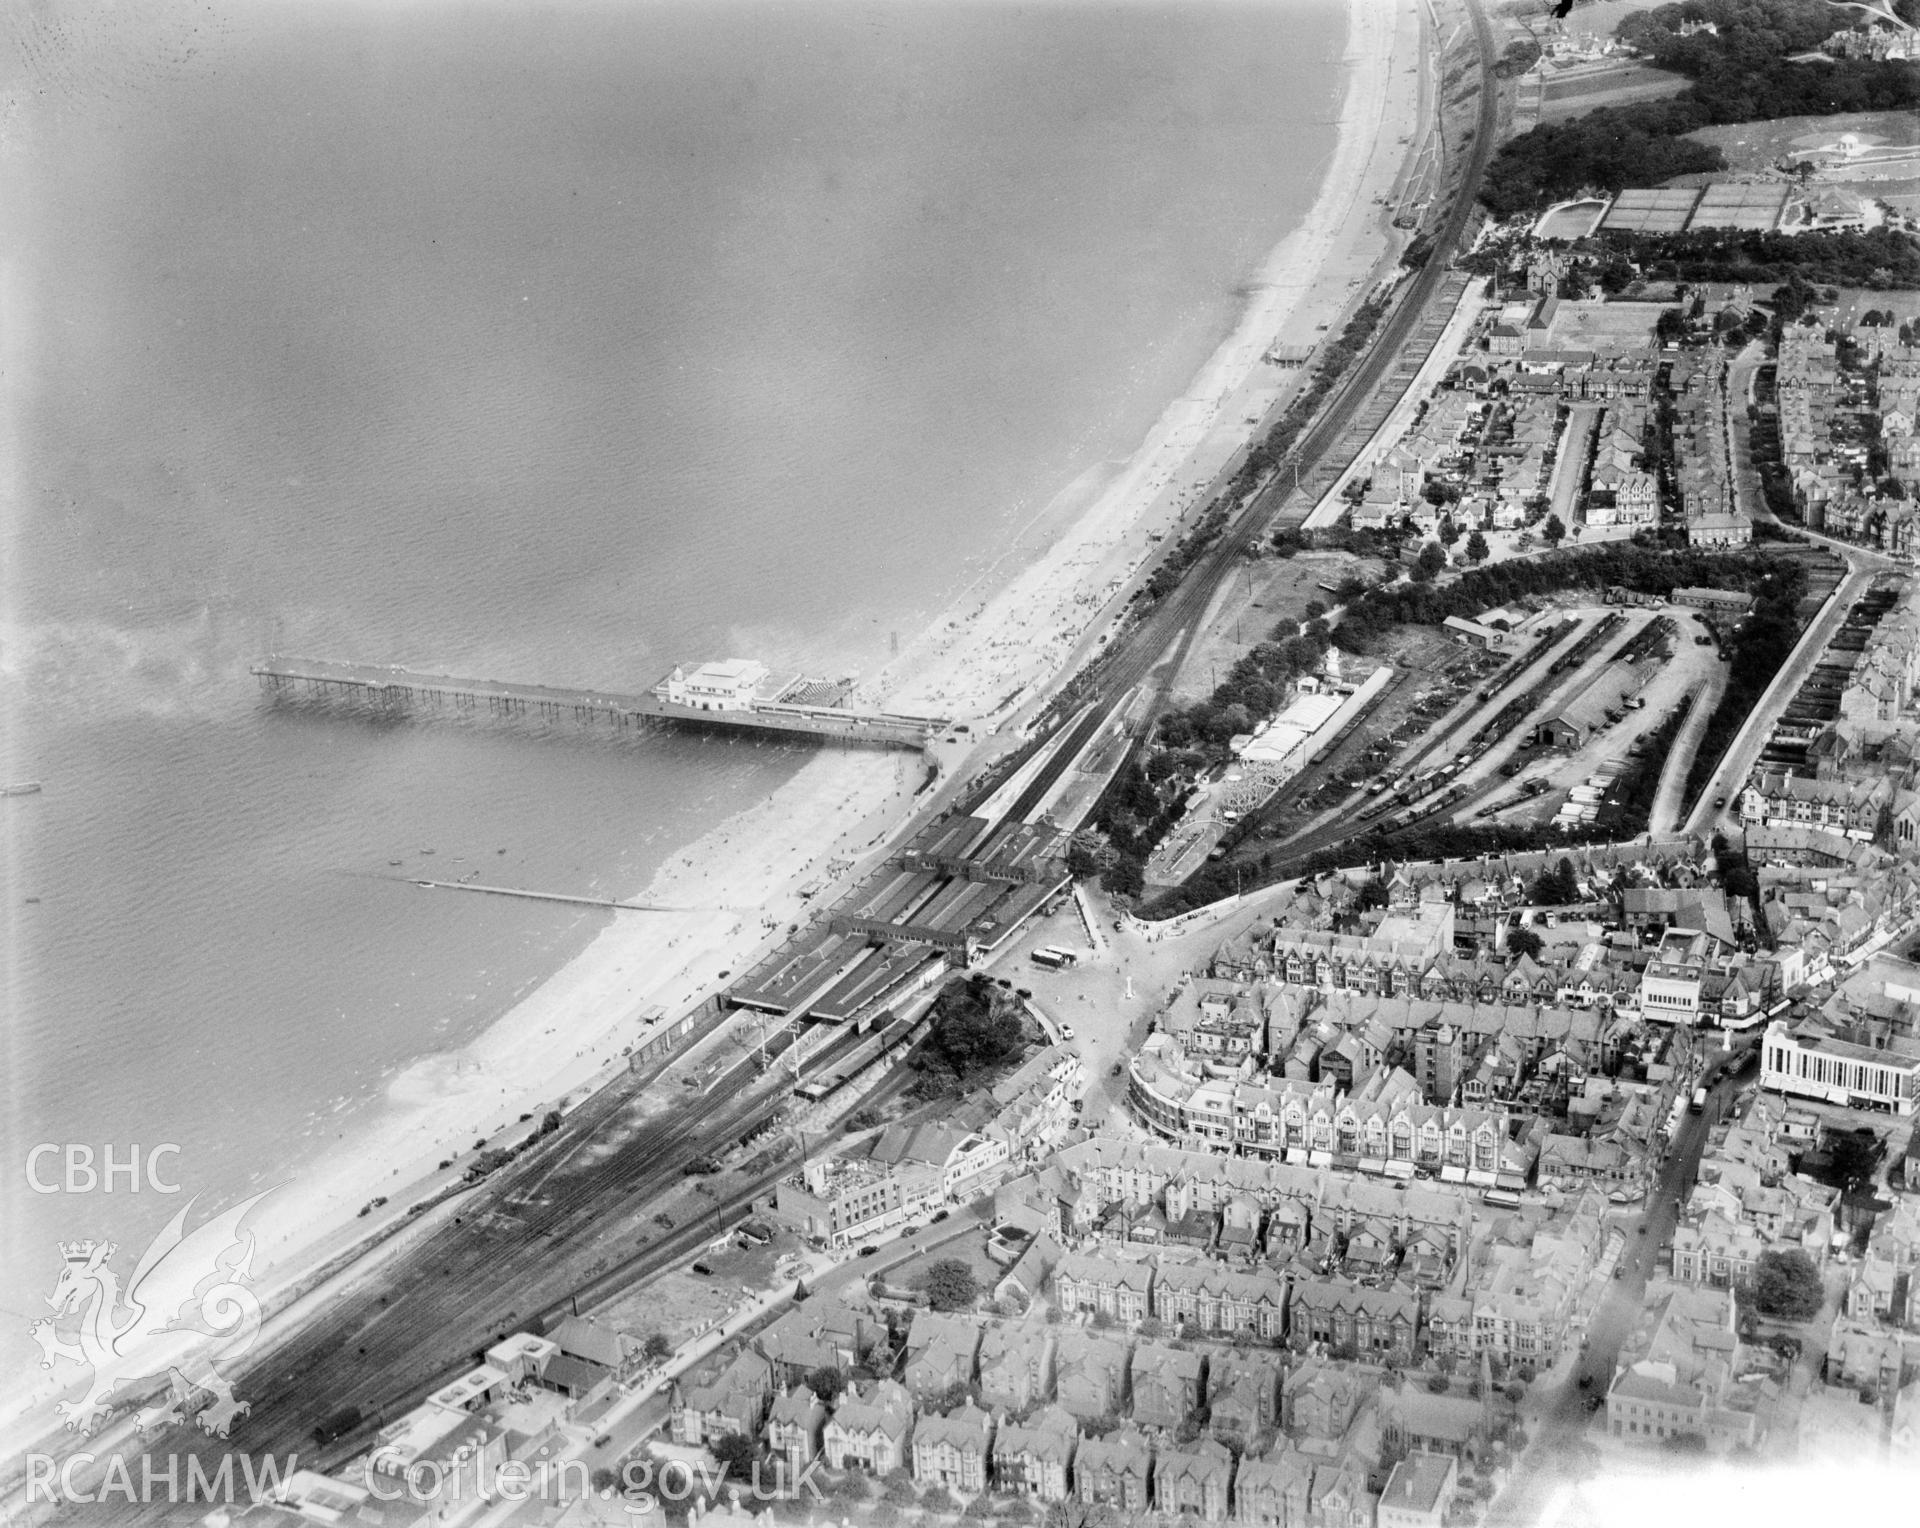 View of Colwyn Bay showing pier and railway station, oblique aerial view. 5?x4? black and white glass plate negative.